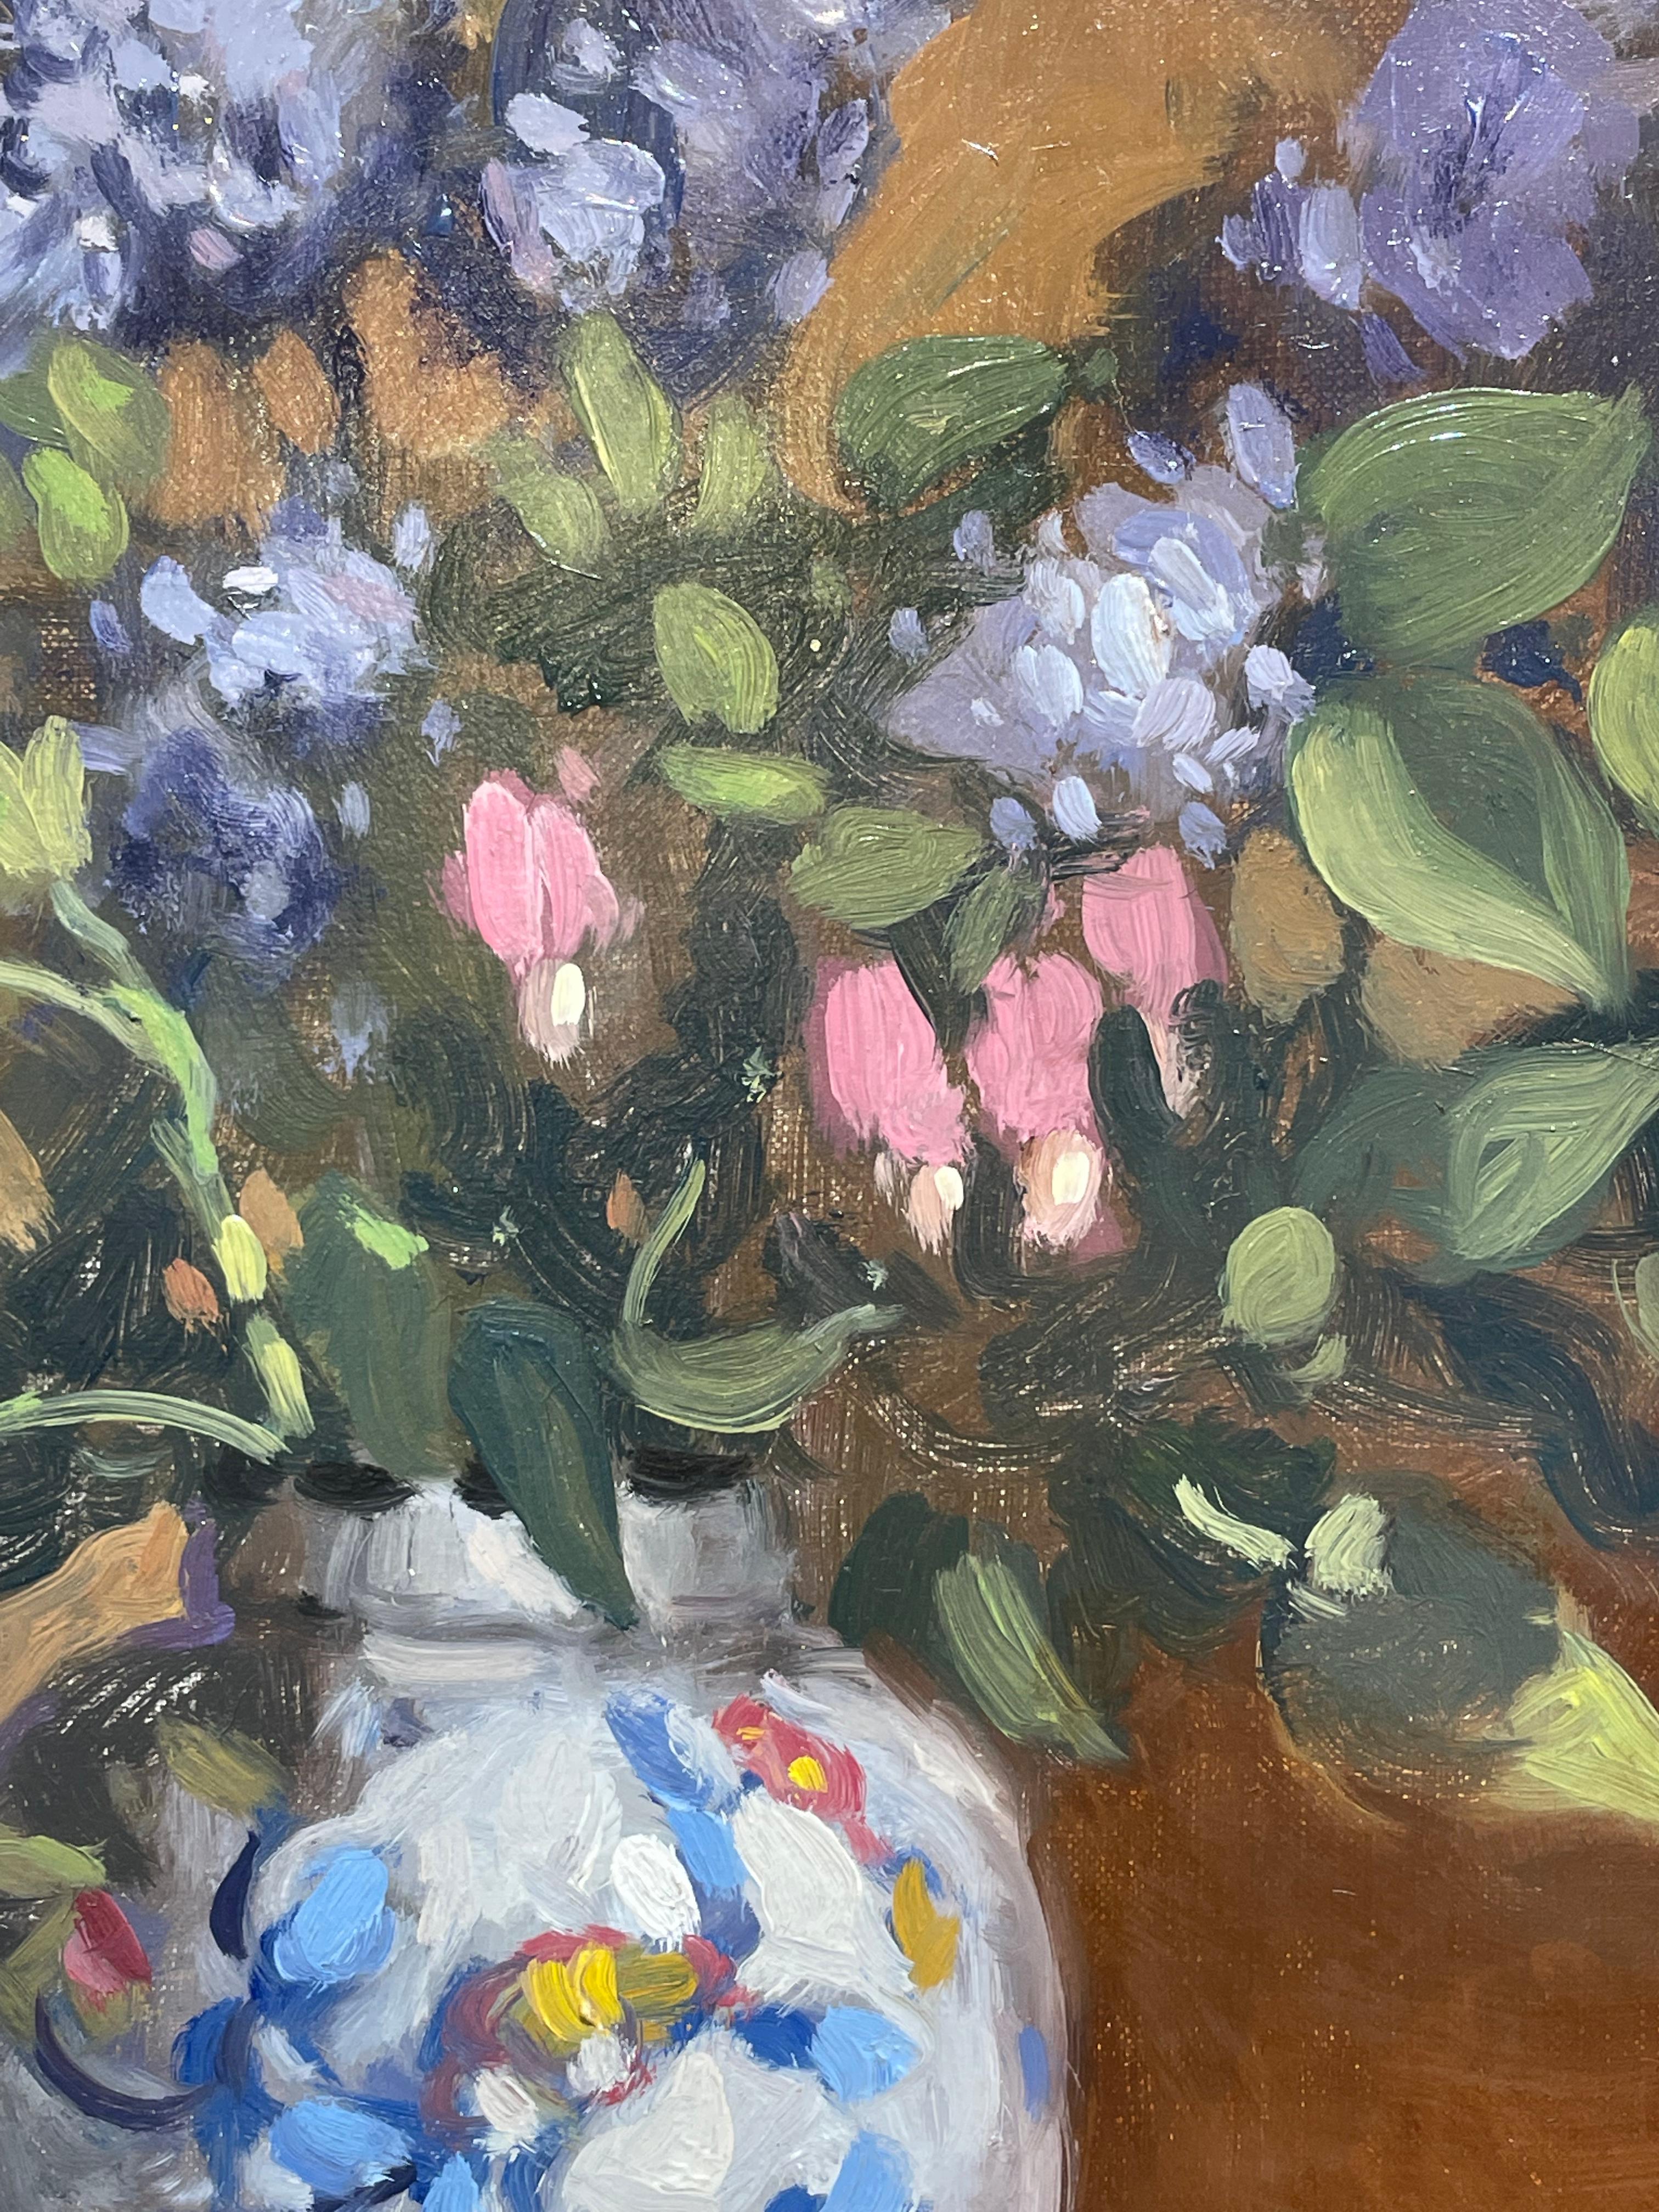 This still life oil painting by John Traynor captures a scene of a large bouquet of purple and pink lilacs in a colorful, porcelain vase. It sits on an off-white fabric next to a lemon which is half peeled, the peel spiraling off the edge of the